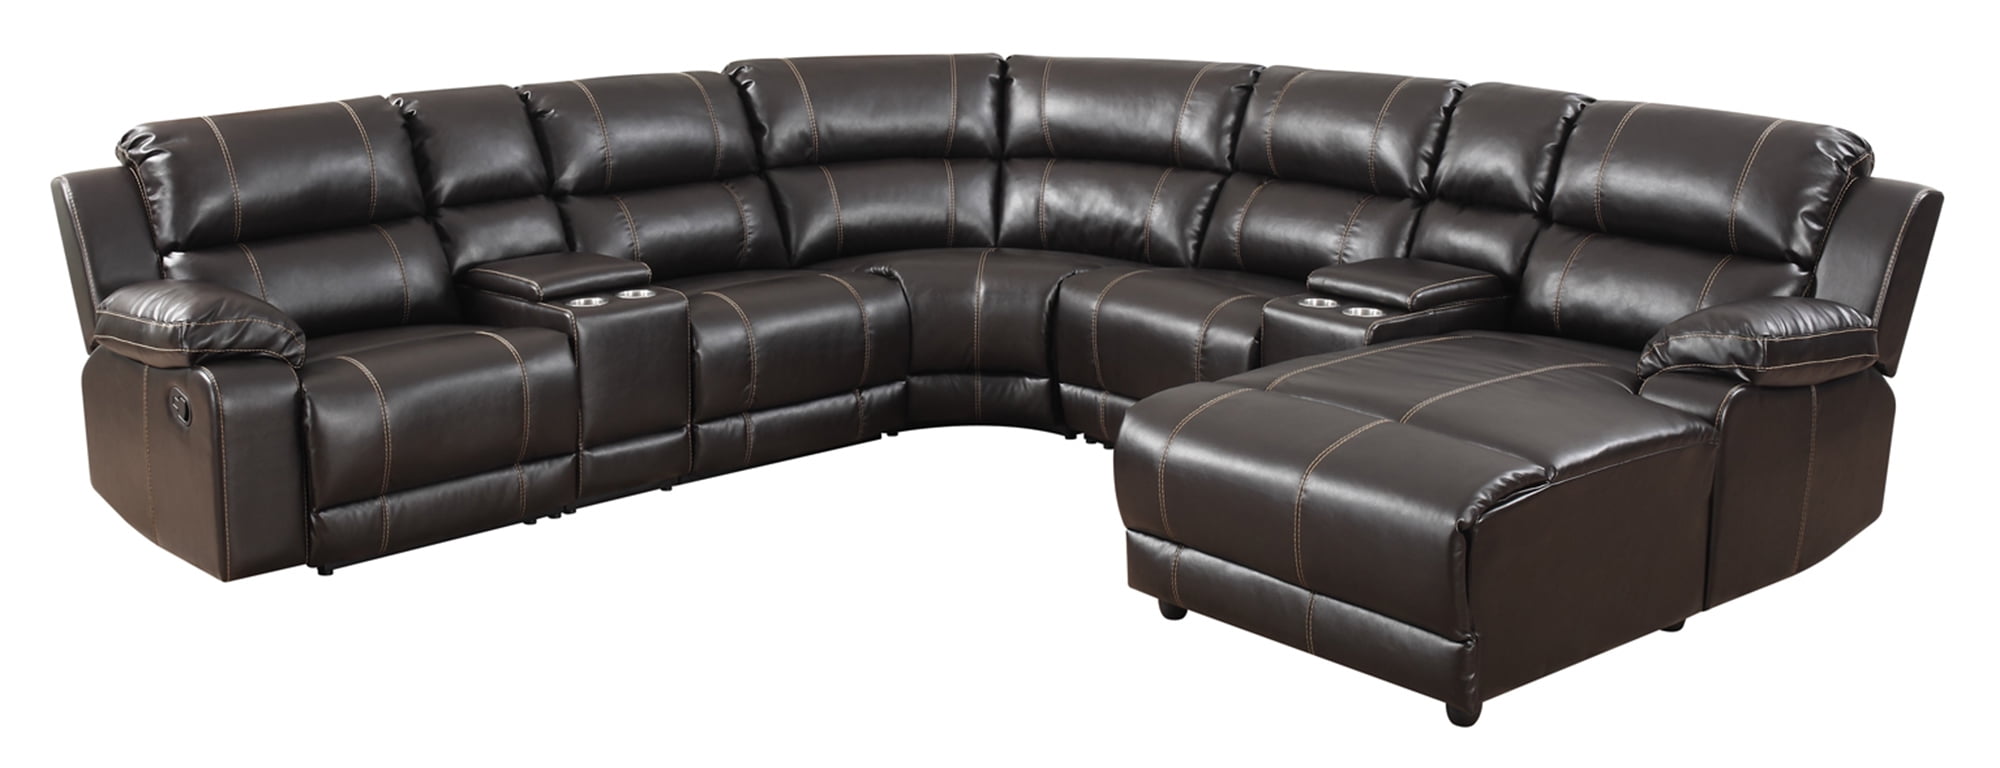 leather sectional sofa under 500